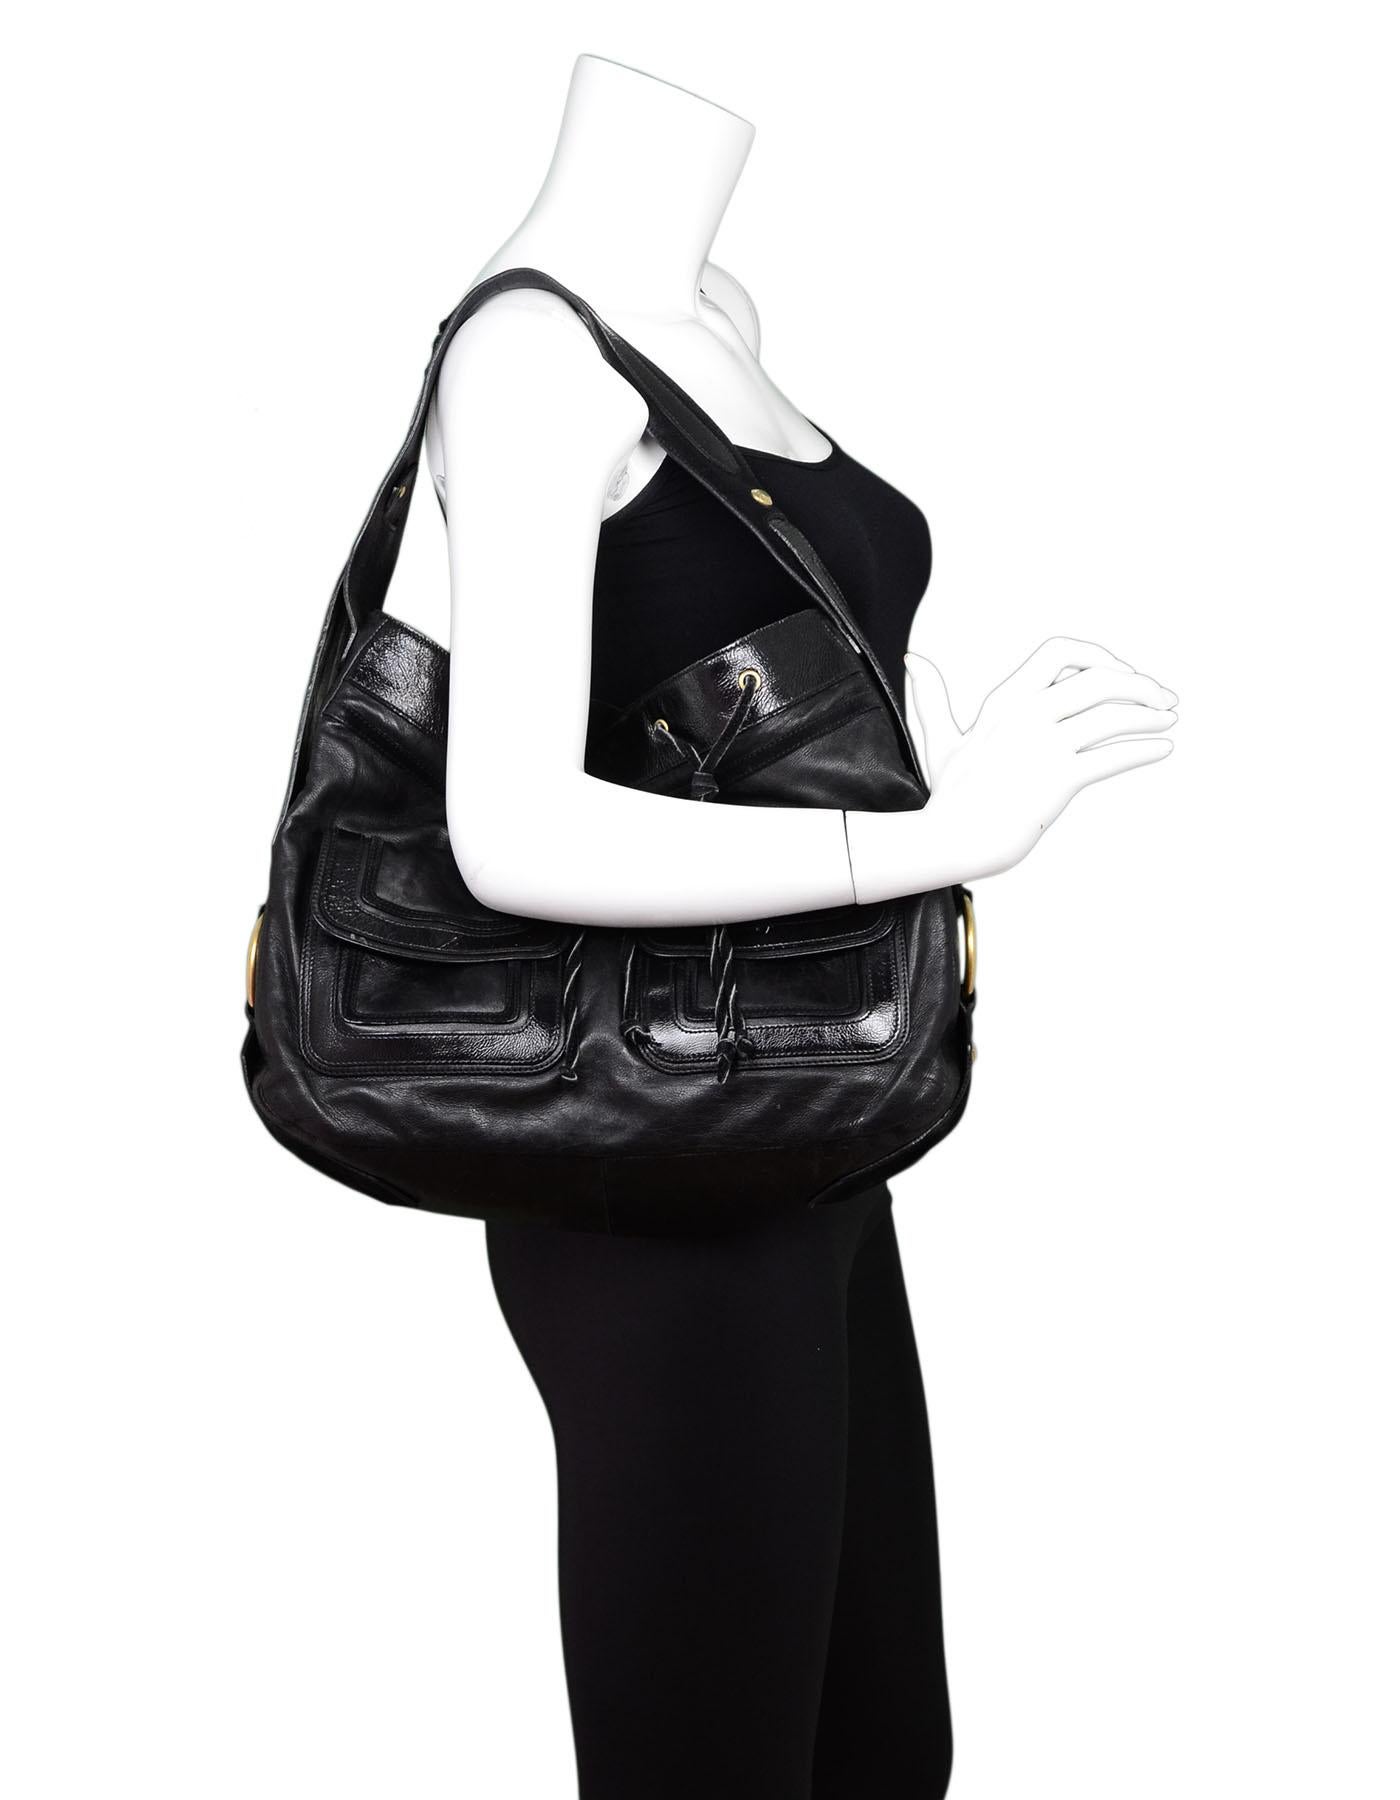 YSL Black Leather Drawstring Hobo

Made In: Italy
Color: Black
Hardware: Goldtone
Materials: Leather, patent leather, suede, metal
Lining: Black textile
Closure/Opening: Open top with center snap
Exterior Pockets: Two front flap pockets
Interior